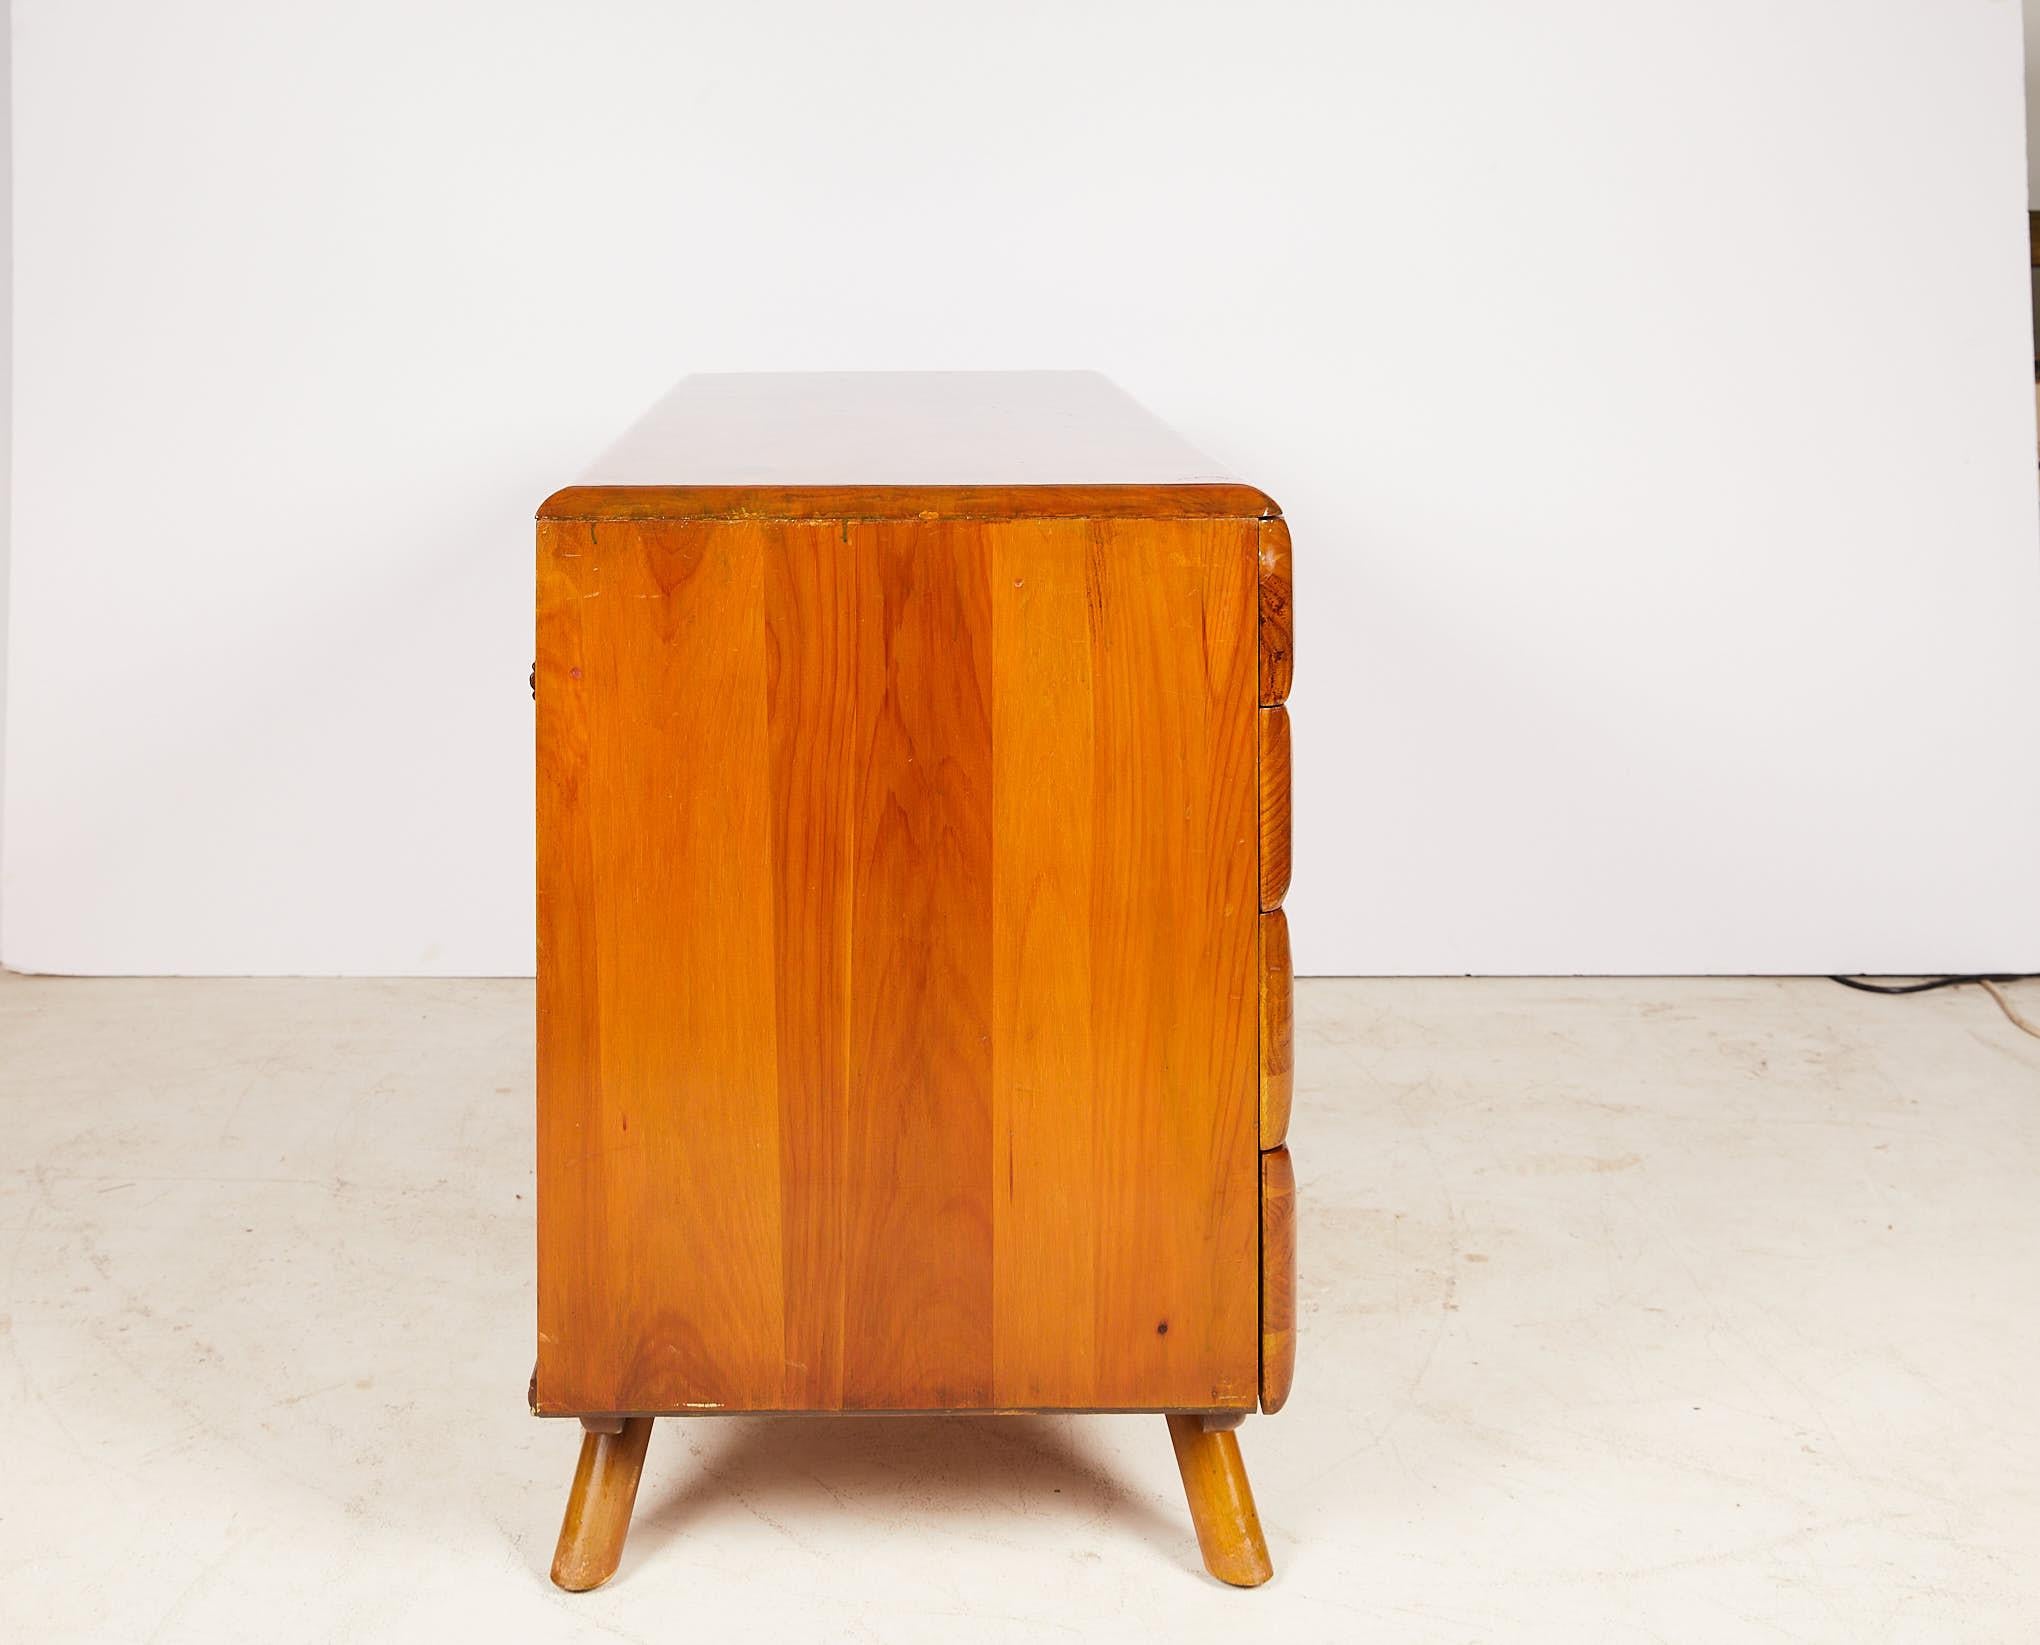 Mid-century Franklin Shockey atomic age nine drawer pedestal desk with brass hardware. The desk is made of solid wood and a part of the sculptured pine series. It features sleek rounded corners and is finished on all sides.